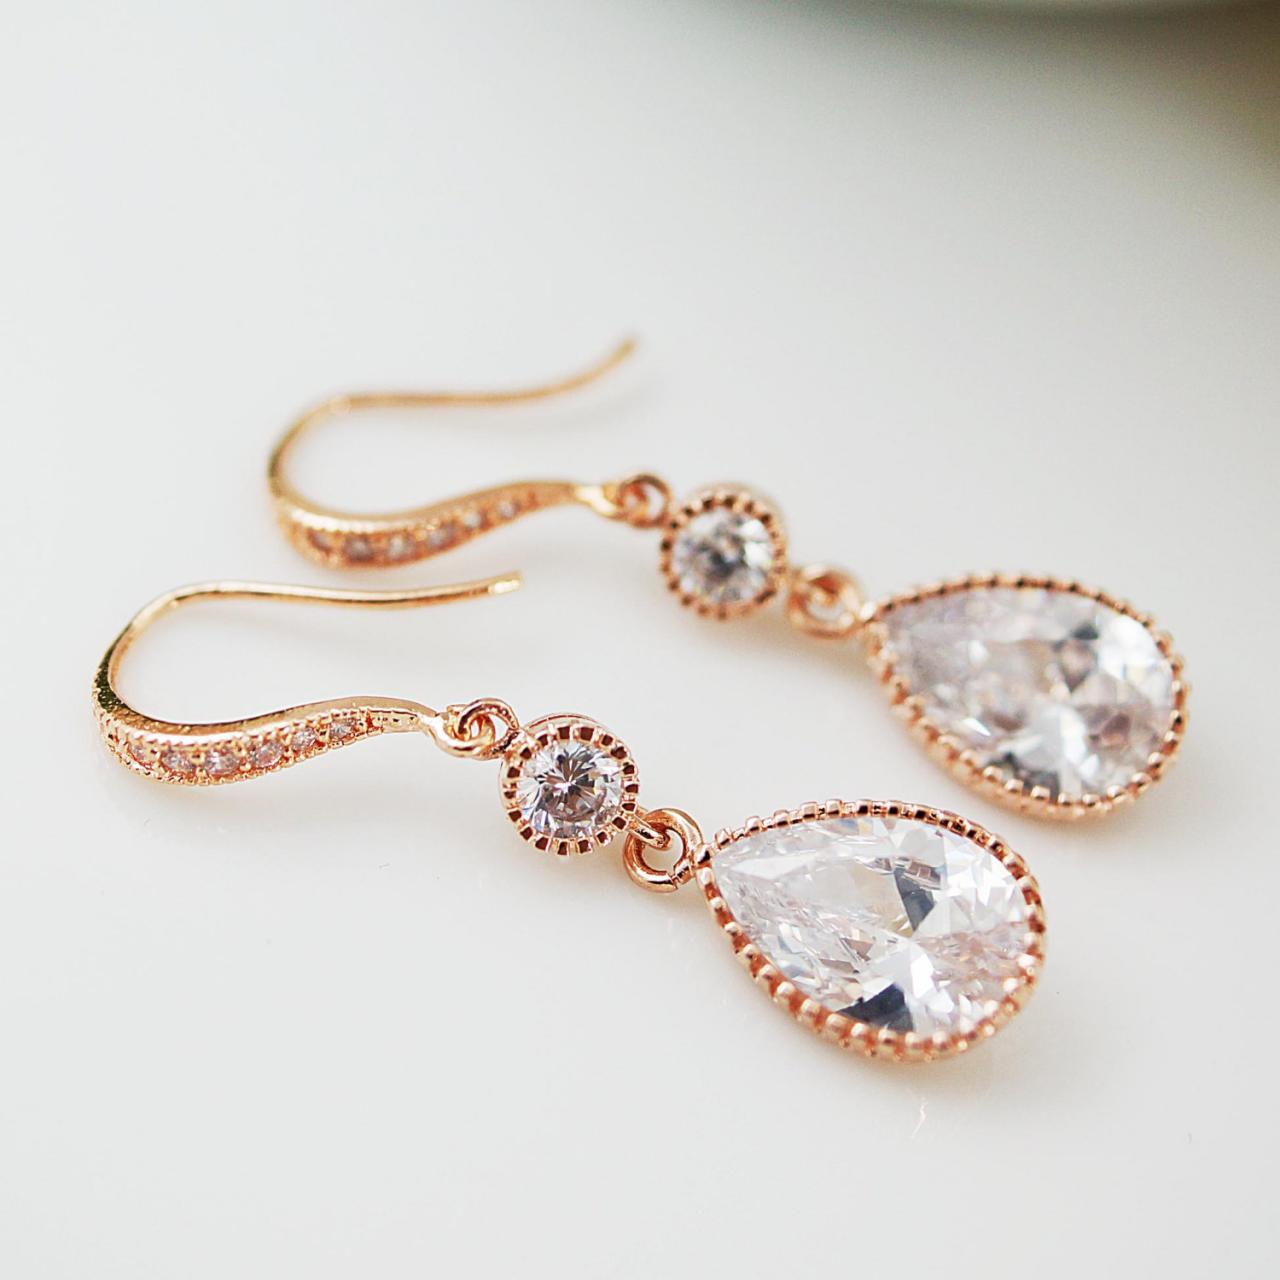 Wedding Jewelry Bridesmaids Gift Bridal Earrings Bridesmaid Earrings Rose Gold Cz Connectors With Cubic Zirconia Crystal Tear Drop Earrings